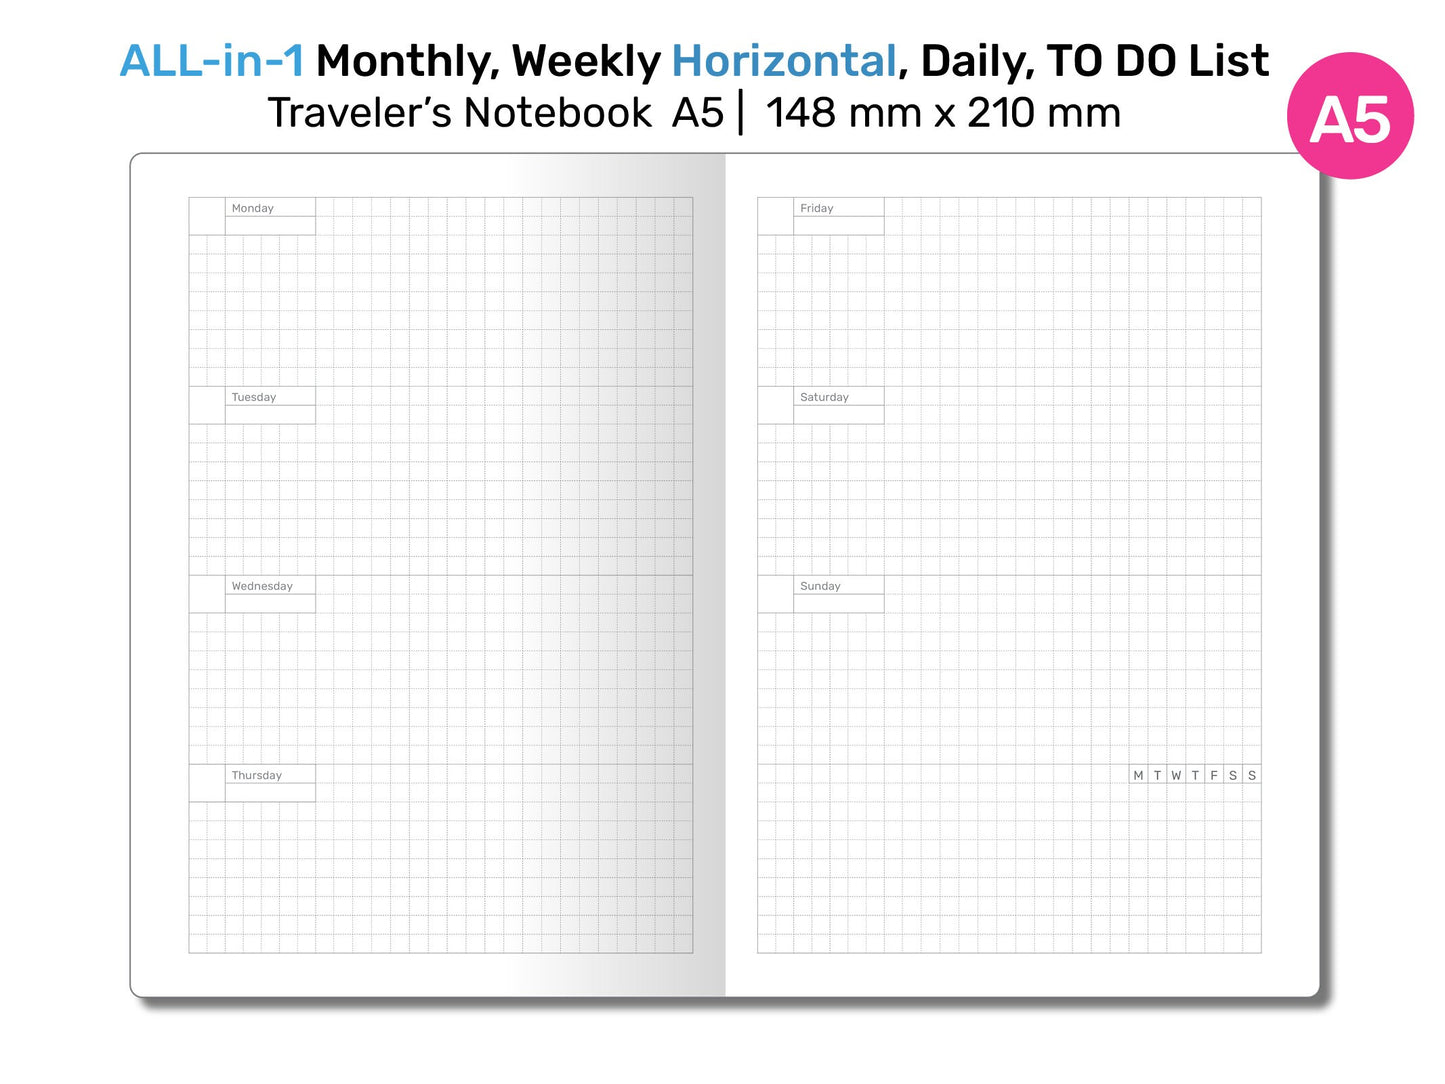 A5 TN All-in-One Monthly, Weekly HORIZONTAL, Tracker & To do List, Grid Notes Printable Traveler's Notebook Insert